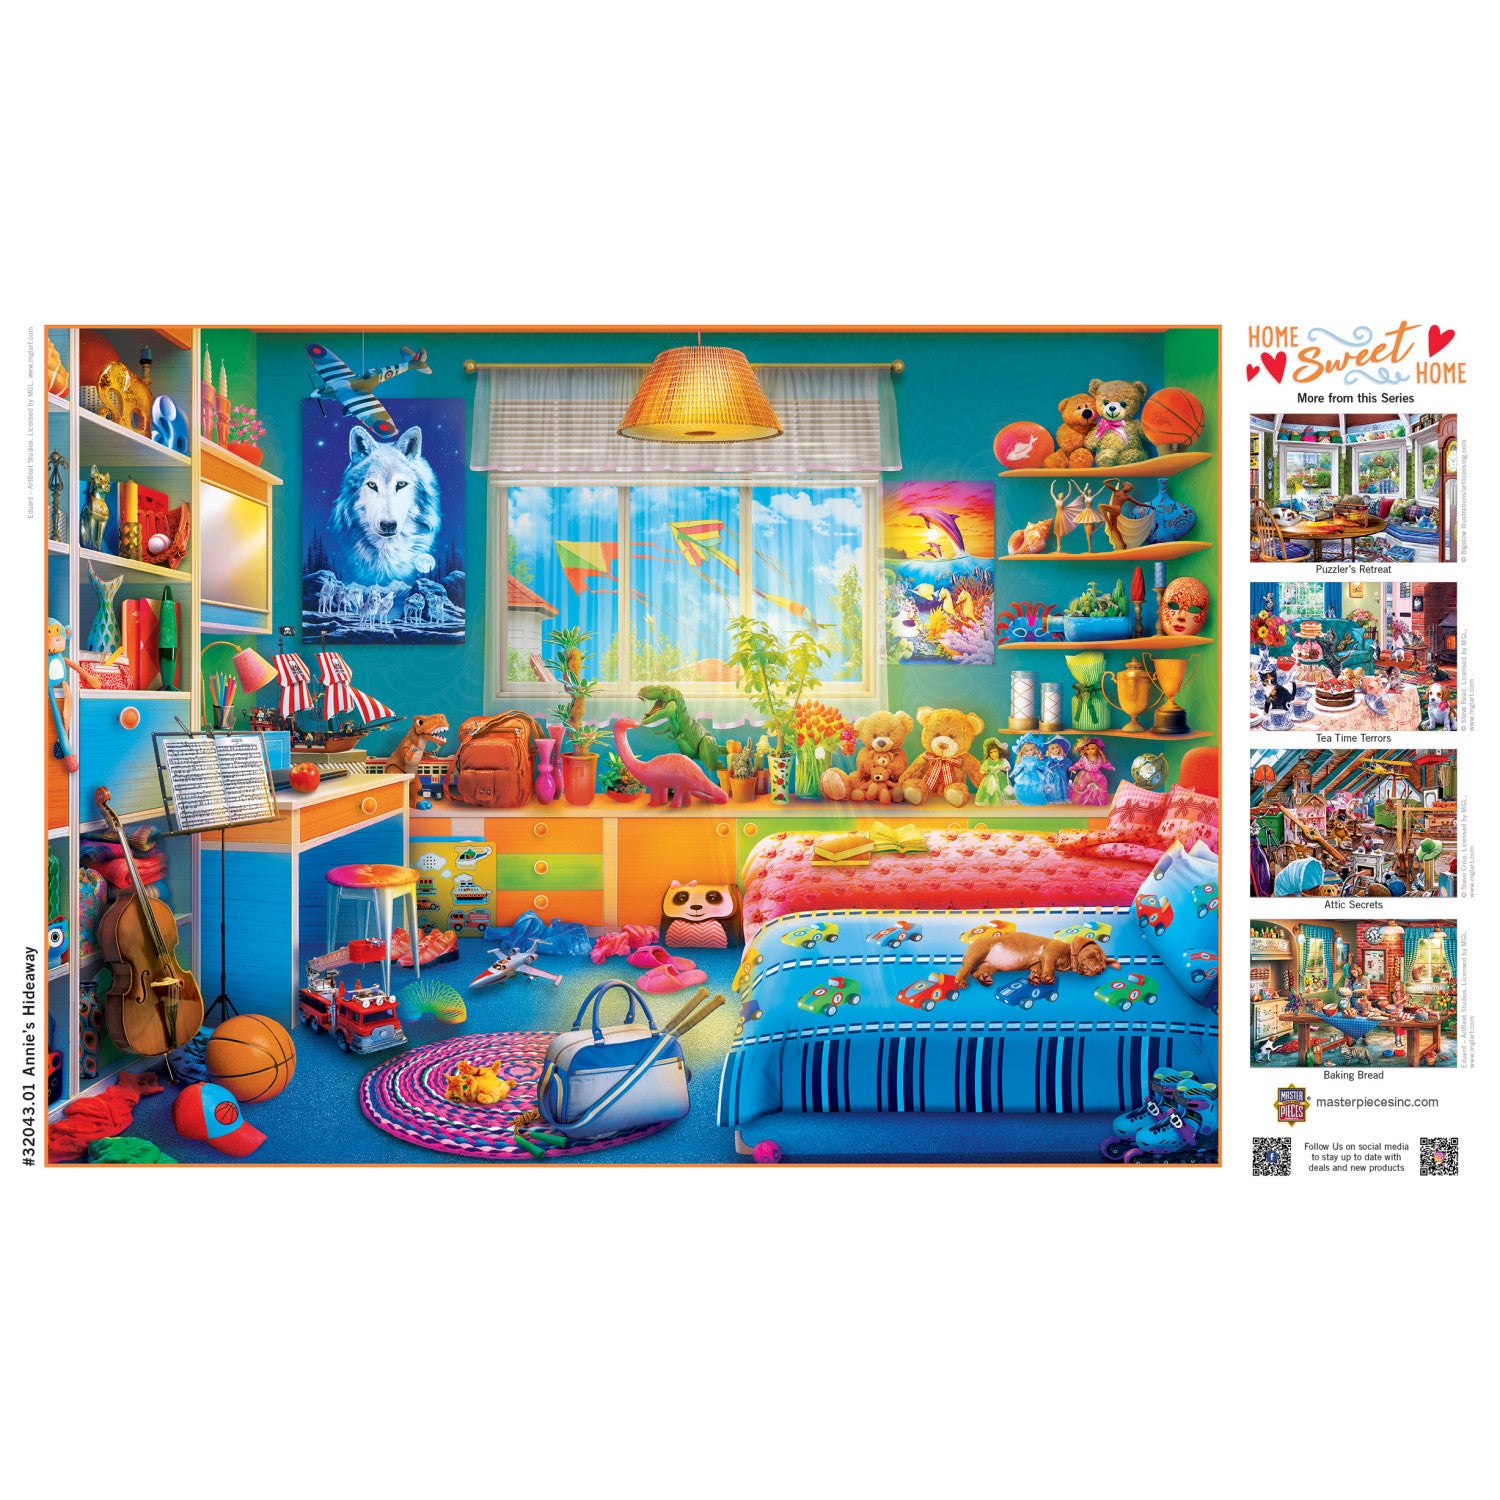 Home Sweet Home - Annie's Hideaway 500 Piece Jigsaw Puzzle